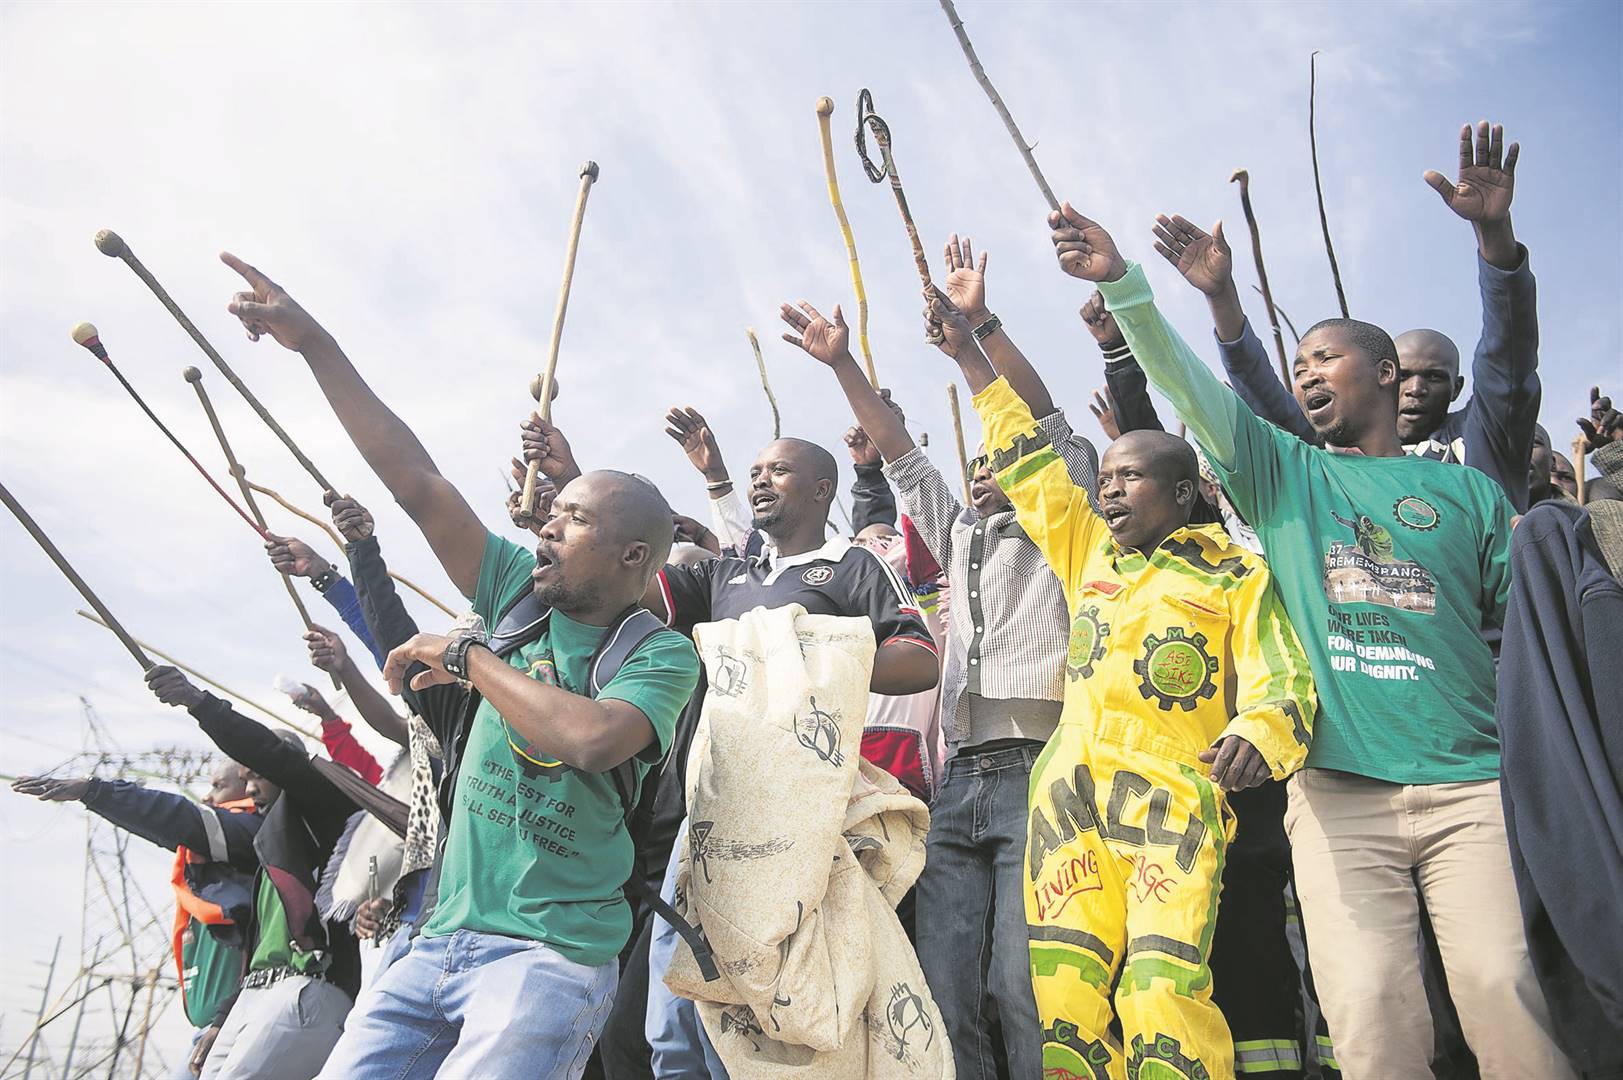 Amcu supporters at a Marikana commemoration Photo: Getty